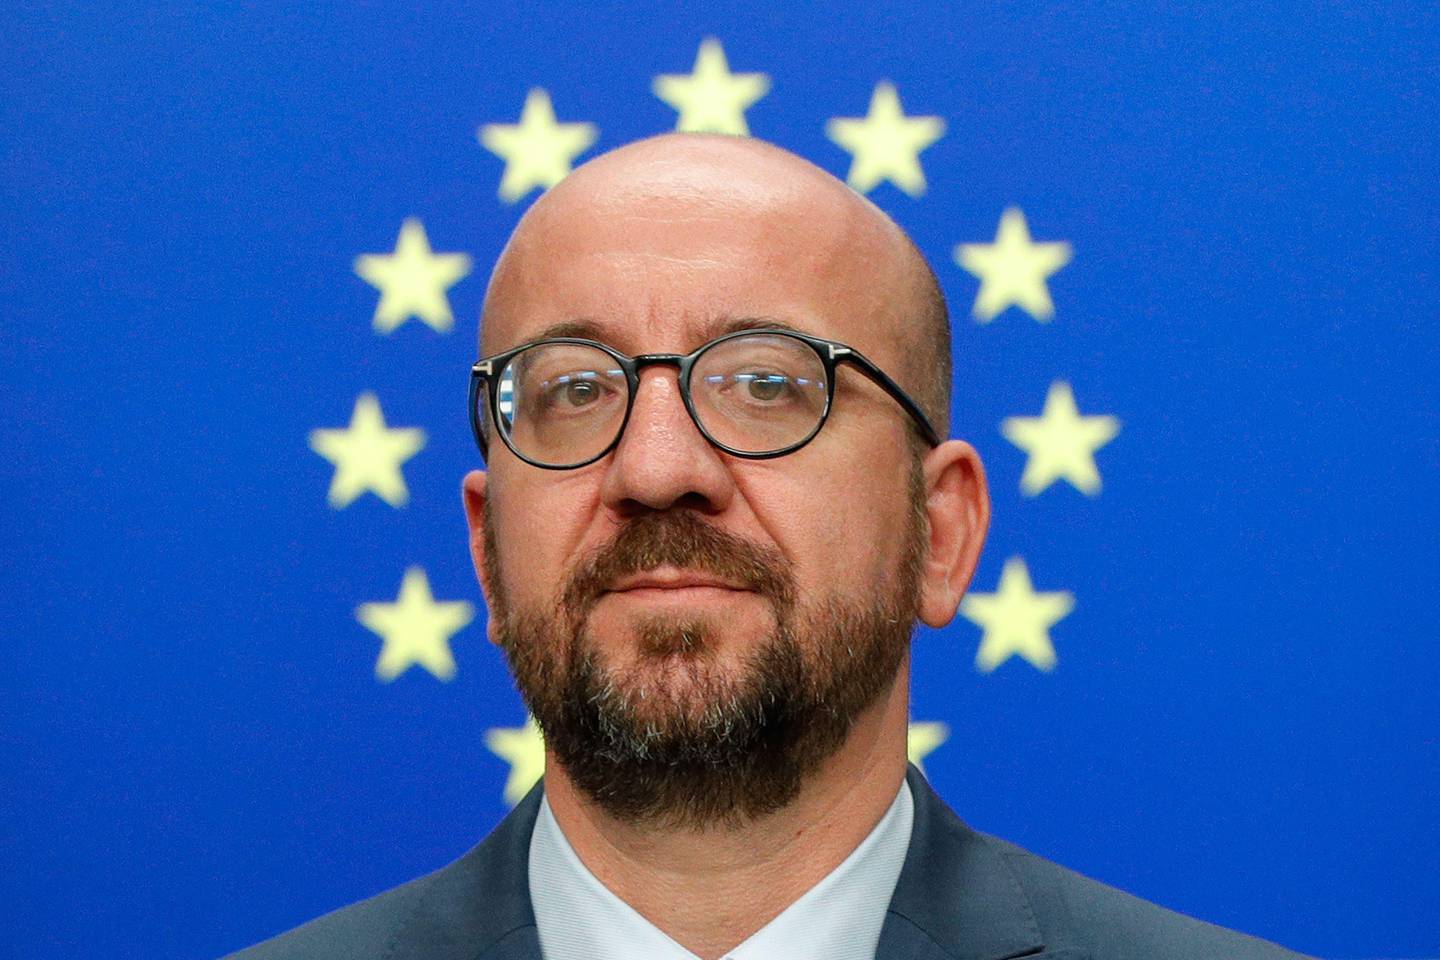 Belgium's Prime Minister Charles Michel looks on as he addresses the media after the EU leaders struck a deal on the bloc's top jobs during the third day of a EU summit, in Brussels on July 2, 2019. - EU leaders on July 2 neared a hard-fought summit compromise to put women in two of the bloc's most important jobs for the first time. After three days of bitter wrangling, German Defence Minister Ursula von der Leyen emerged as a serious candidate to replace Jean-Claude Juncker at the head of the European Commission, and Charles Michel was appointed EU Council President. (Photo by GEOFFROY VAN DER HASSELT / AFP)